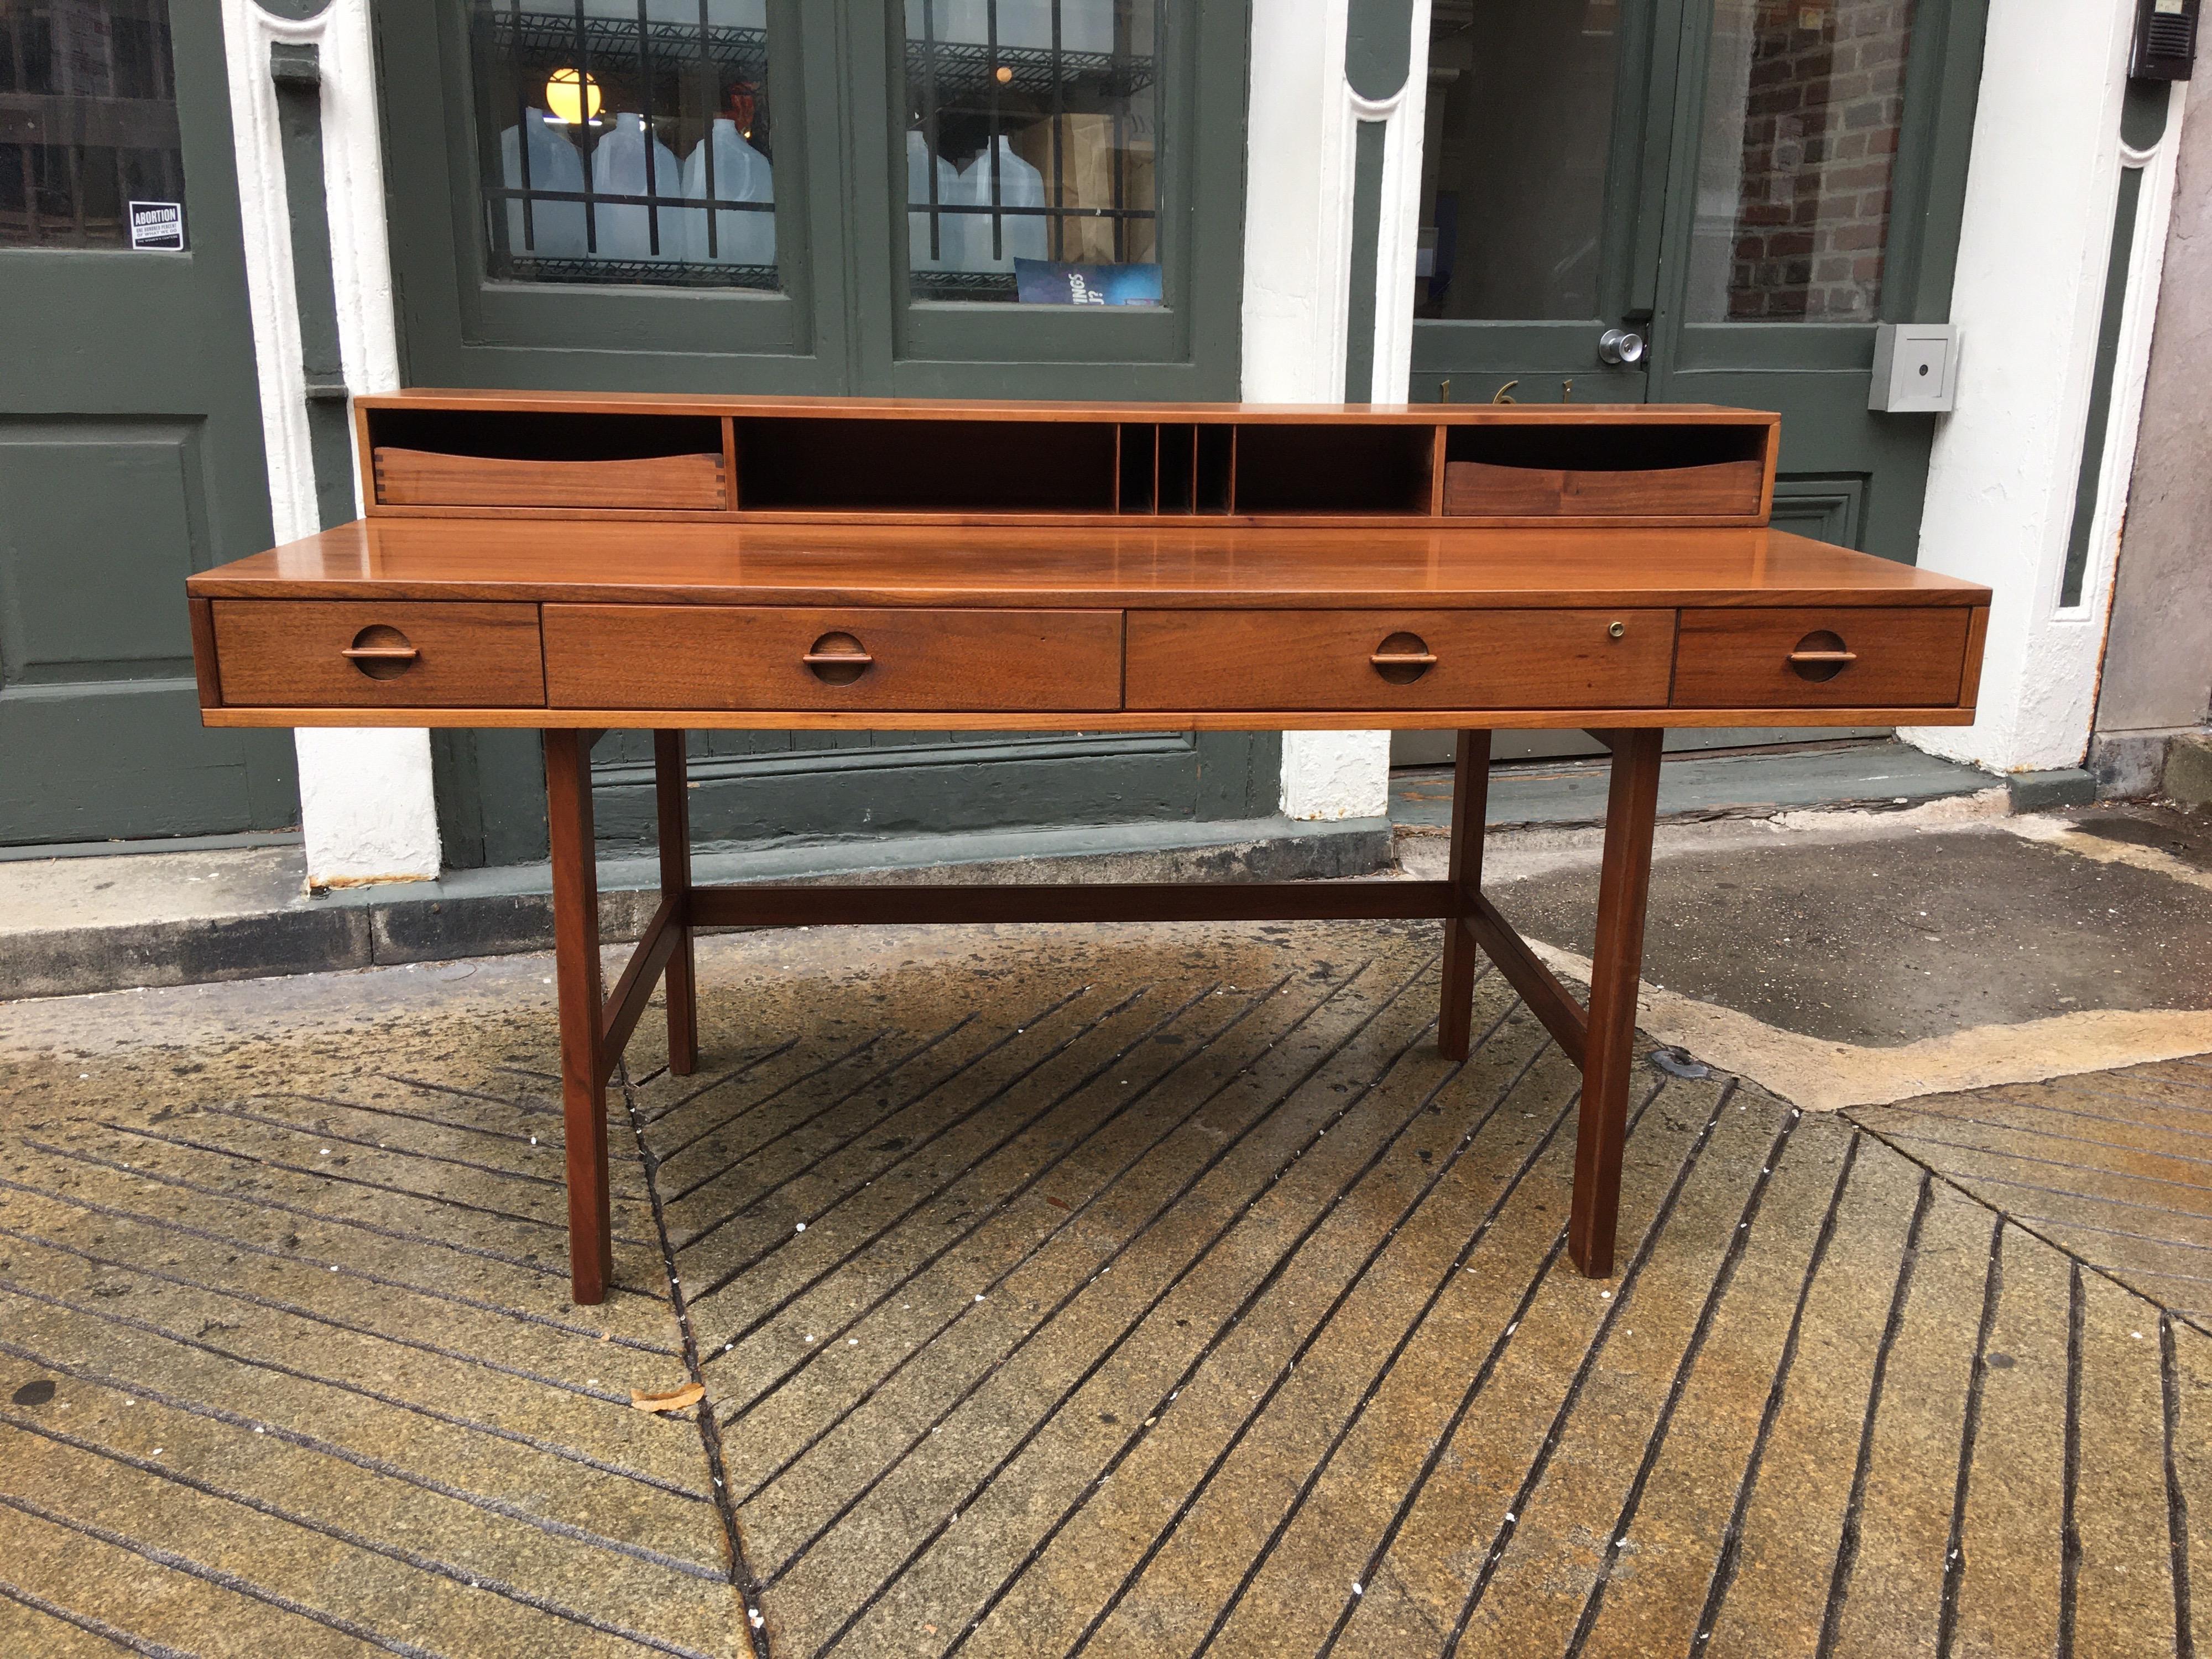 Classic Scandinavian Modern Peter Lovig Nielsen teak desk. Upper Level can flip down to add extra work space or use as a partner's desk. In Small spaces desk can also function as a dining table! This Model is dated 1970. Desk has been cleaned and